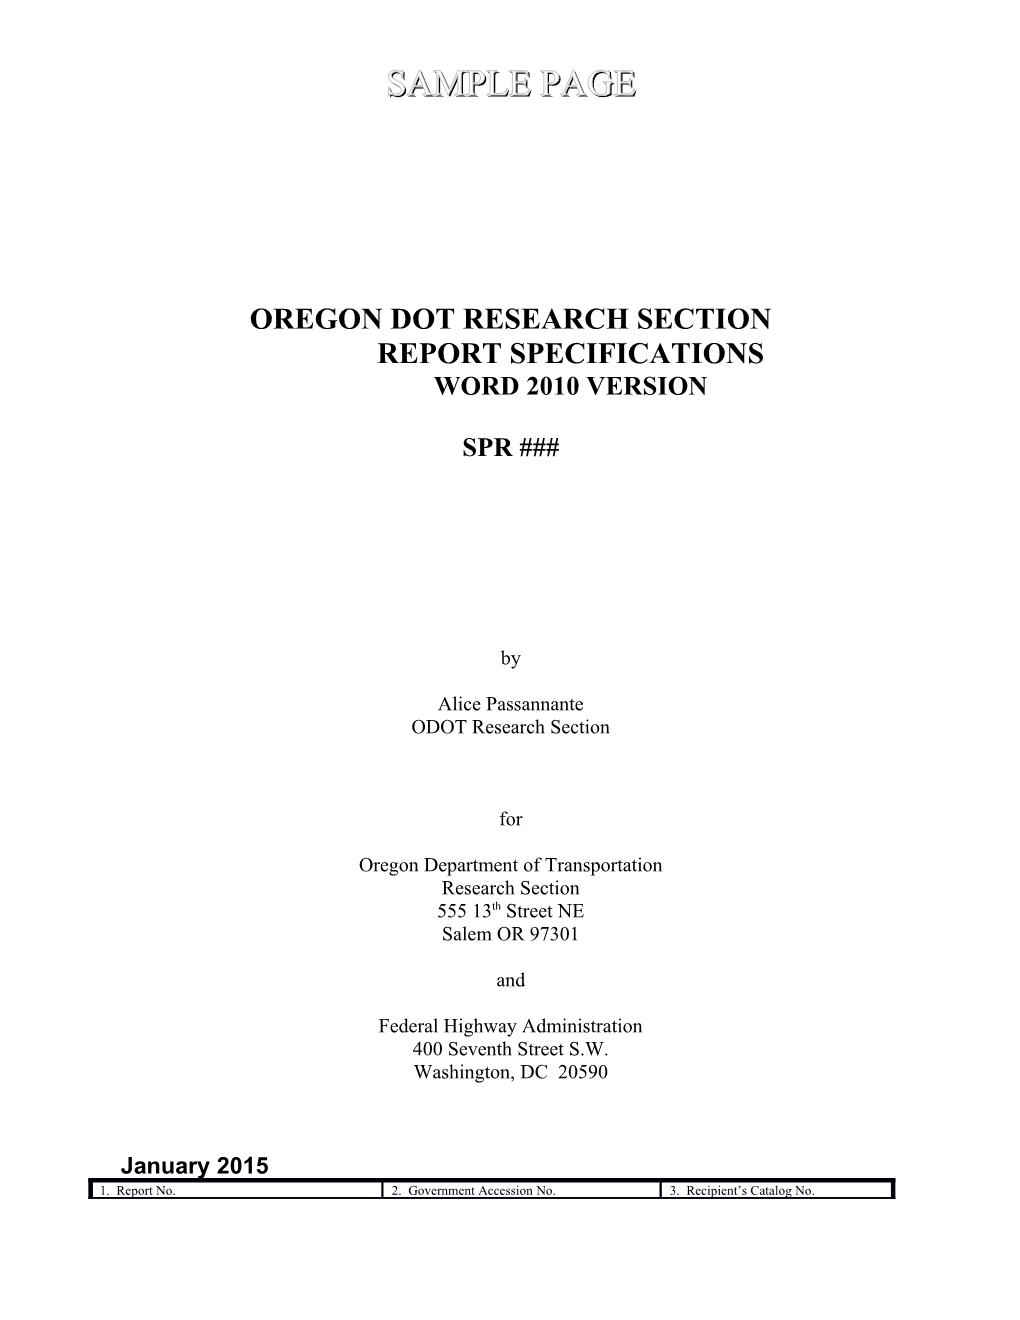 Research Report Specifications